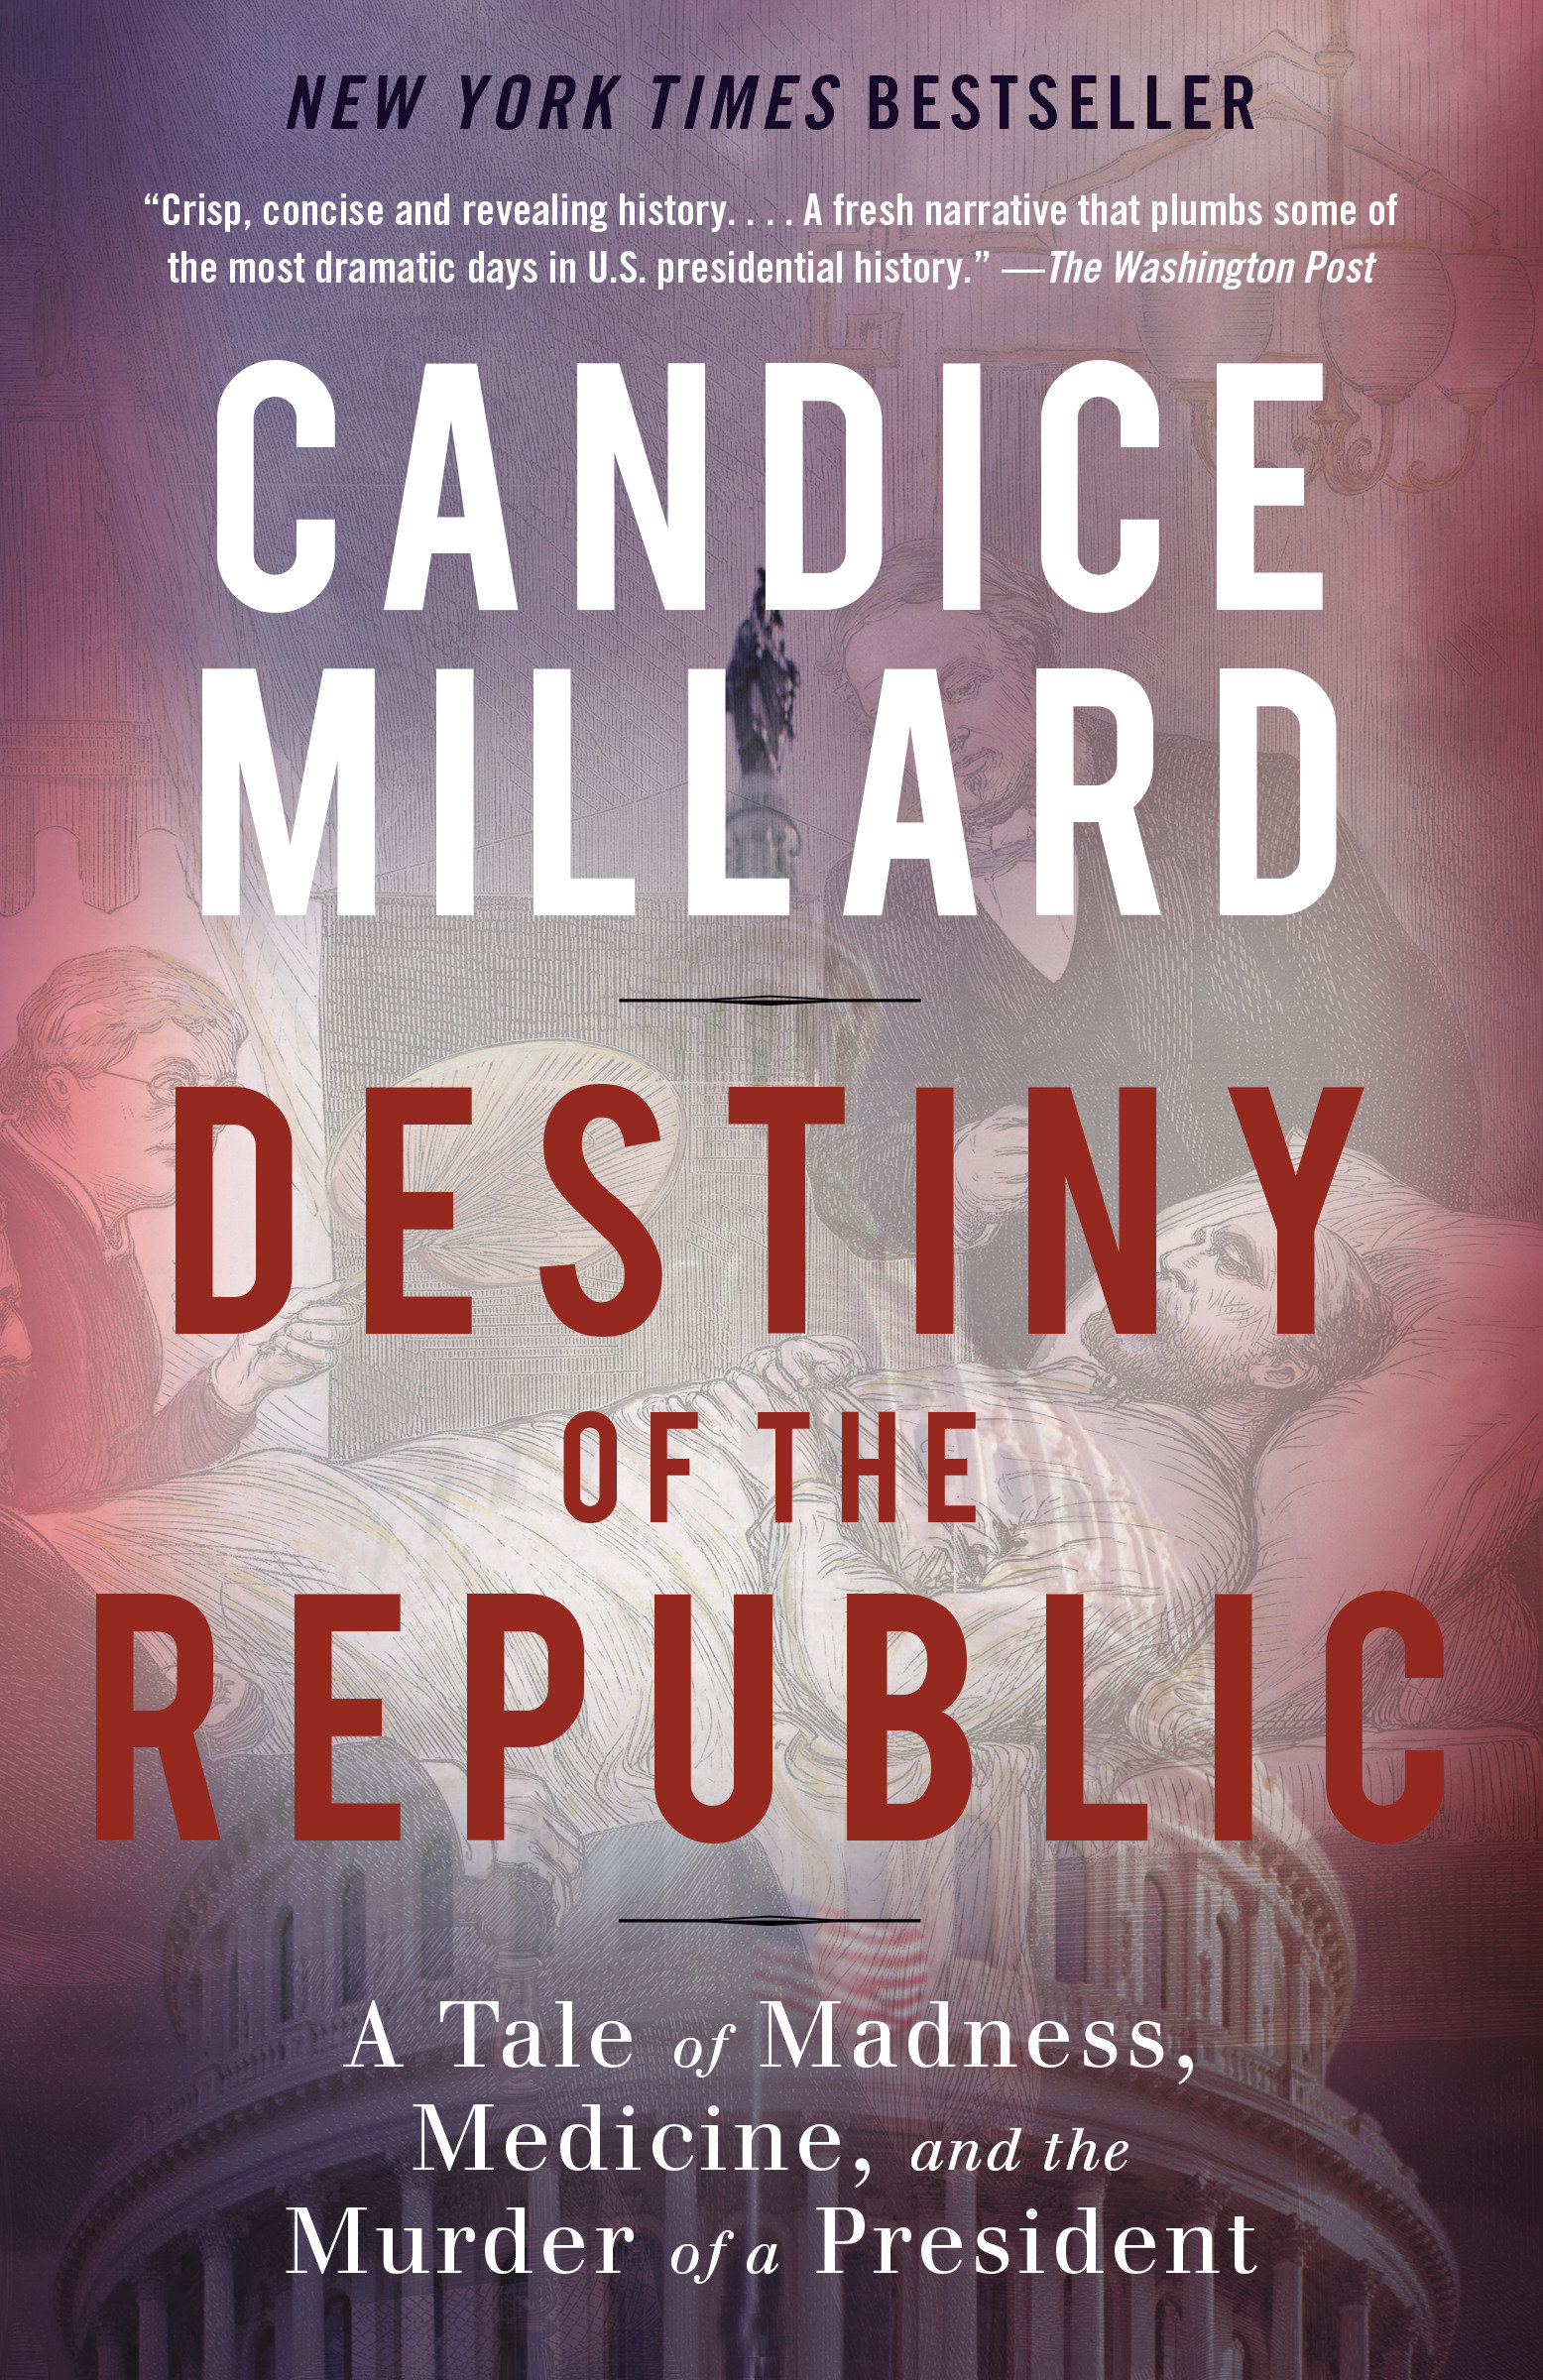 Destiny of the Republic a tale of madness, medicine and the murder of a president cover image